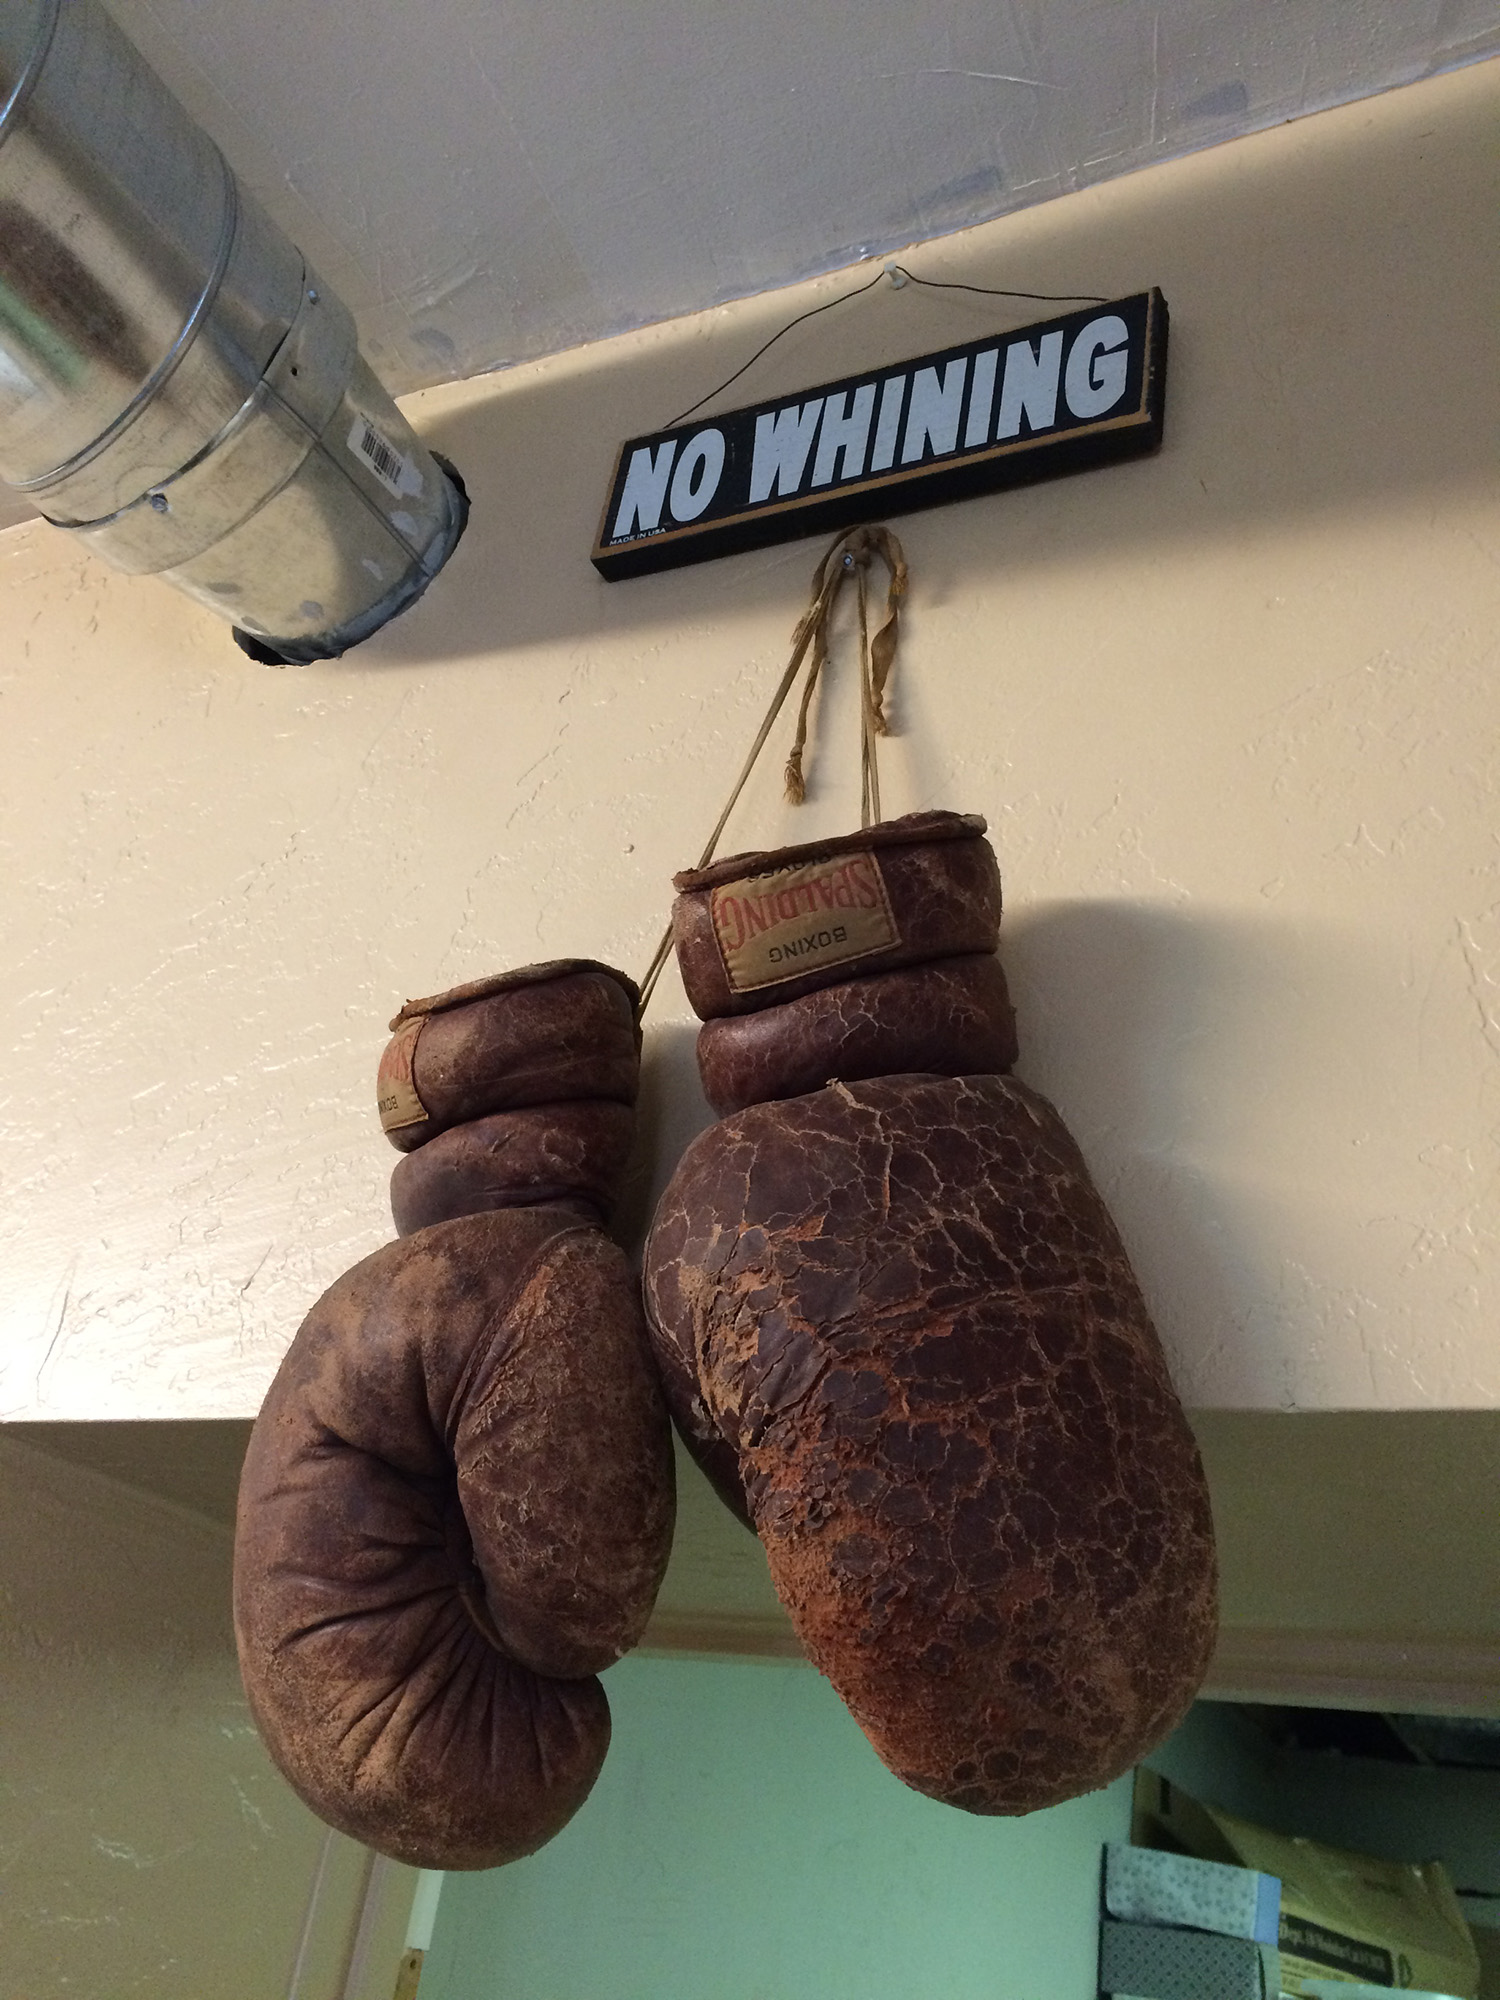 Boxing gloves hanging from a wall with a sign that reads "No Whining".